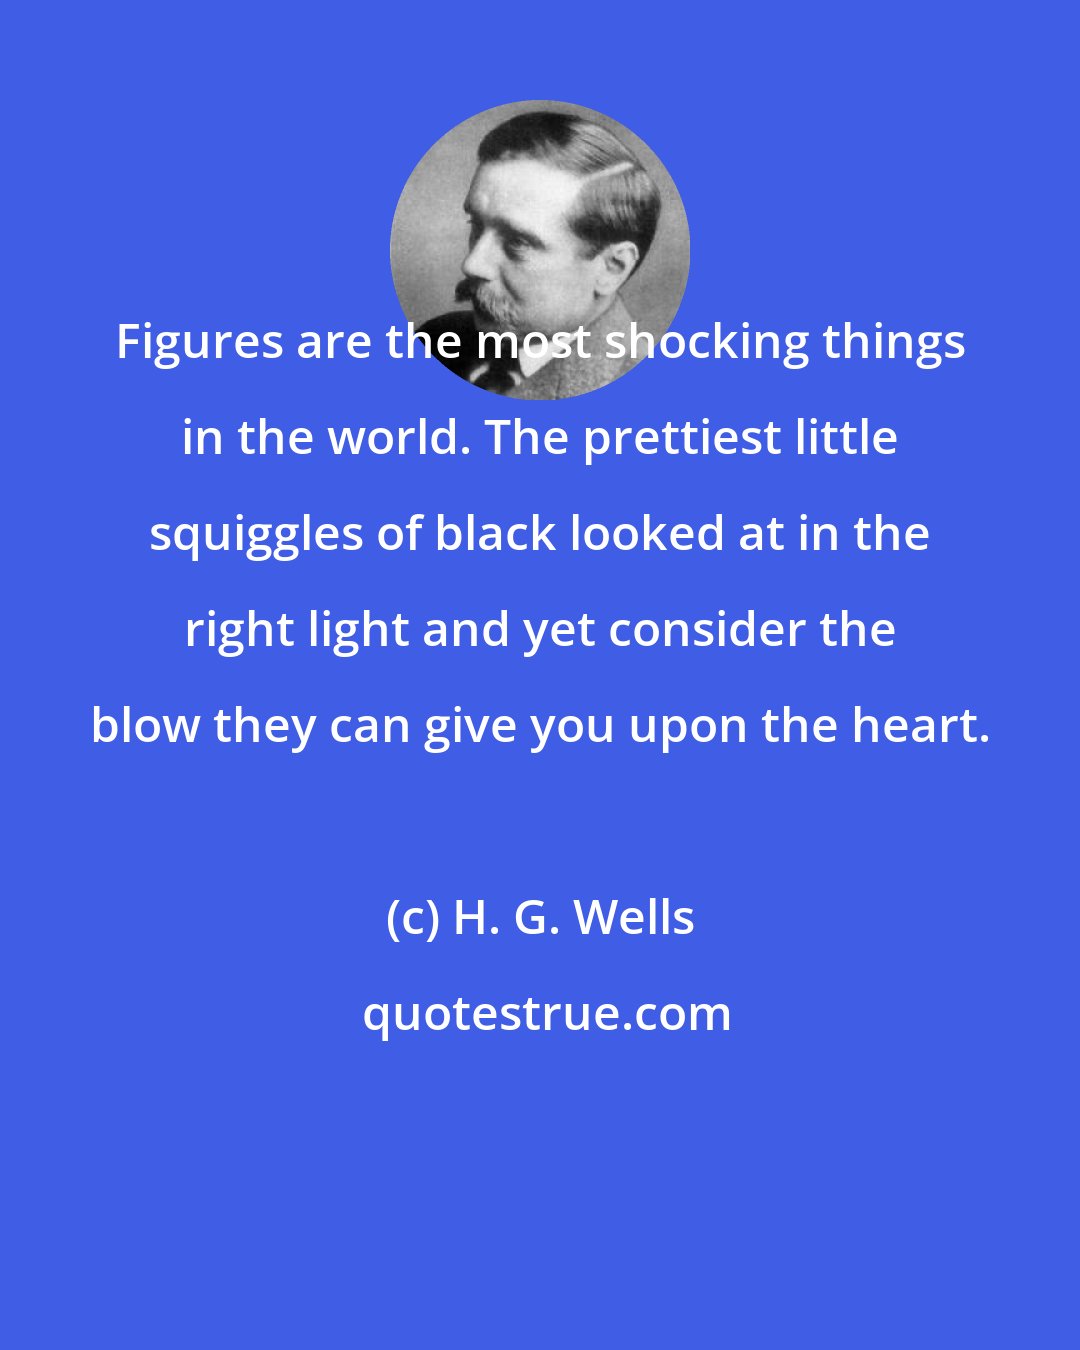 H. G. Wells: Figures are the most shocking things in the world. The prettiest little squiggles of black looked at in the right light and yet consider the blow they can give you upon the heart.